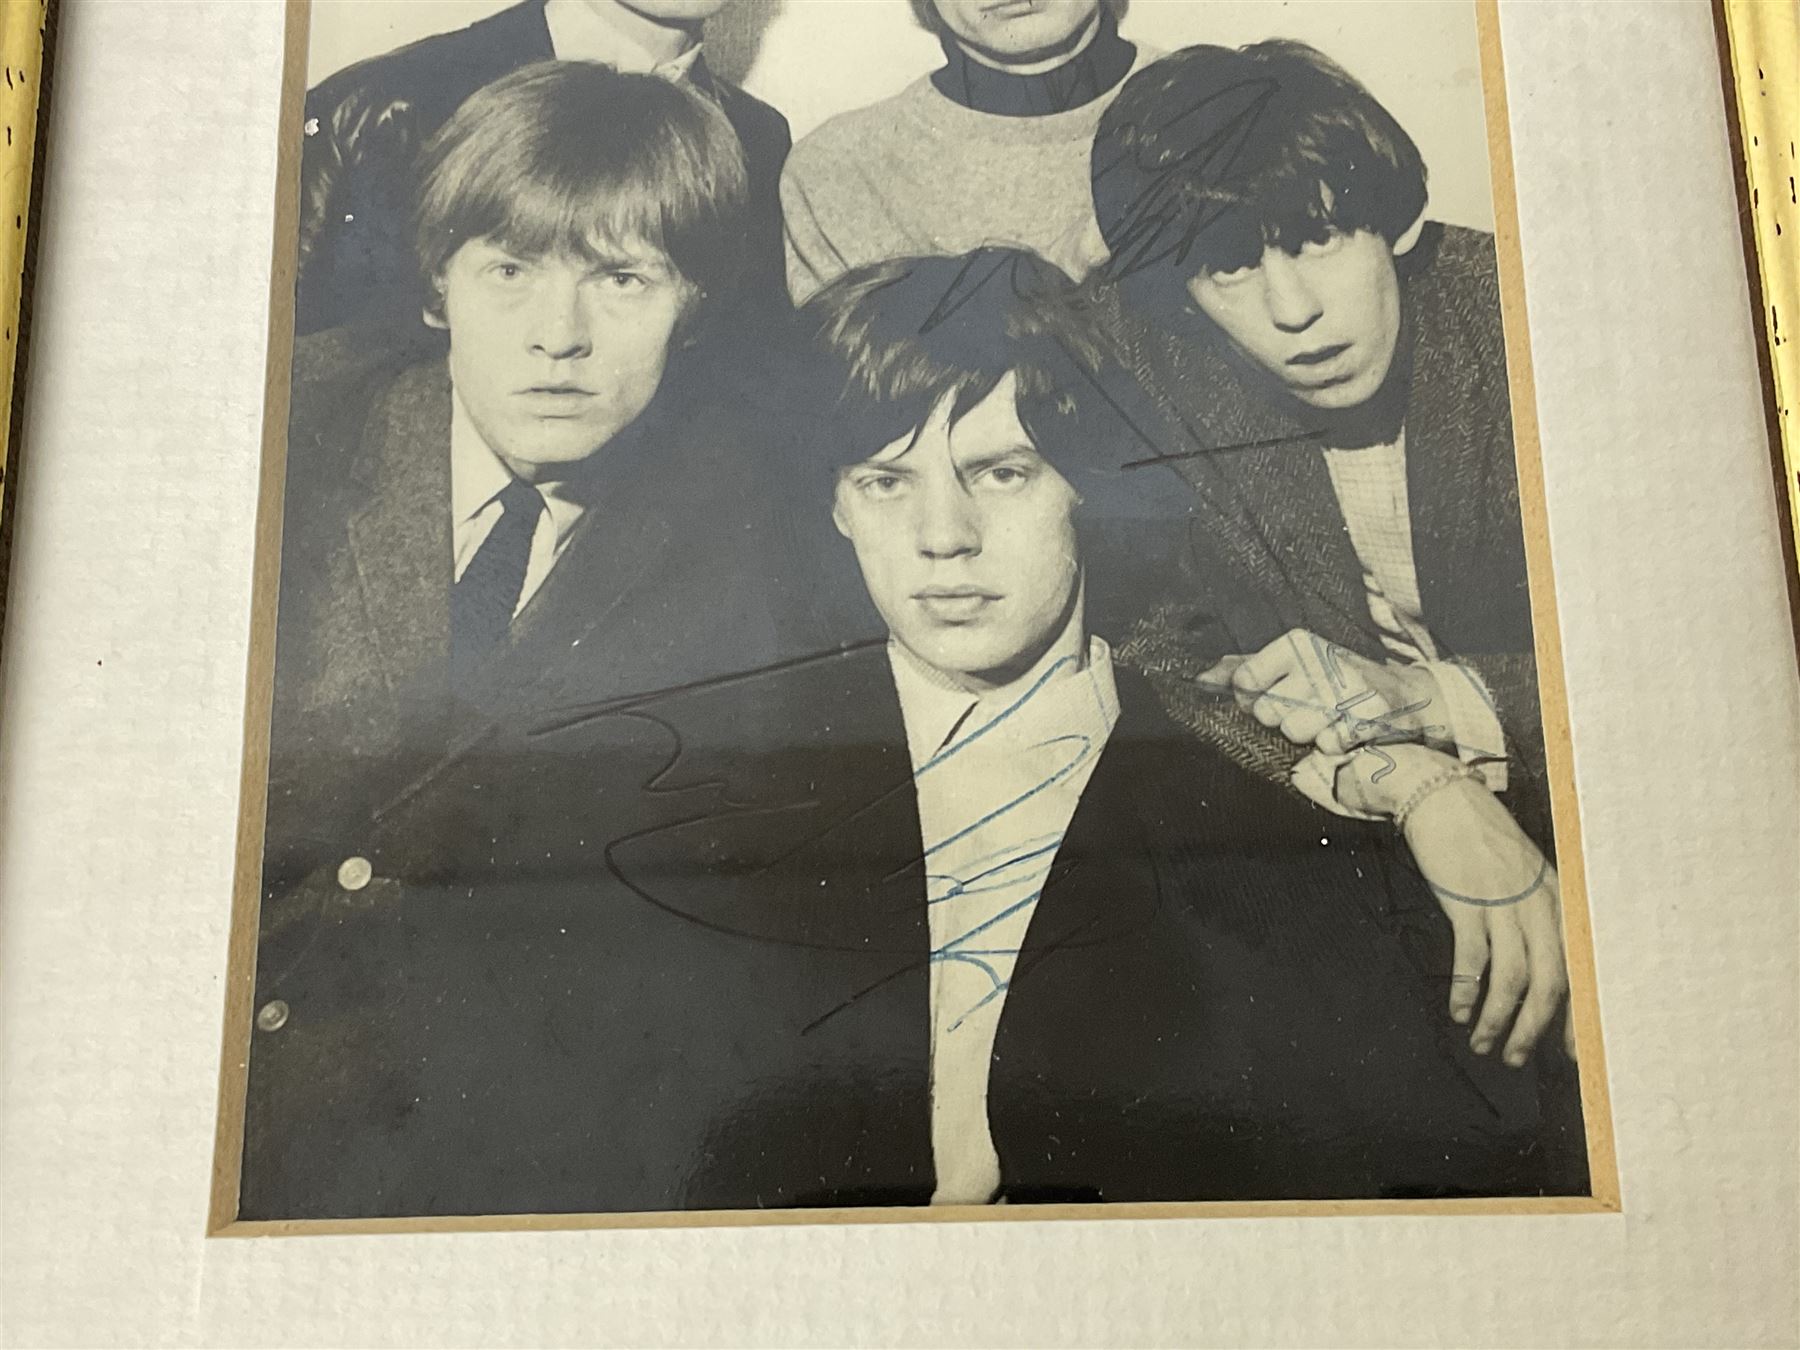 1960s autographed photographic postcard of The Rolling Stones showing Mick Jagger - Image 4 of 8